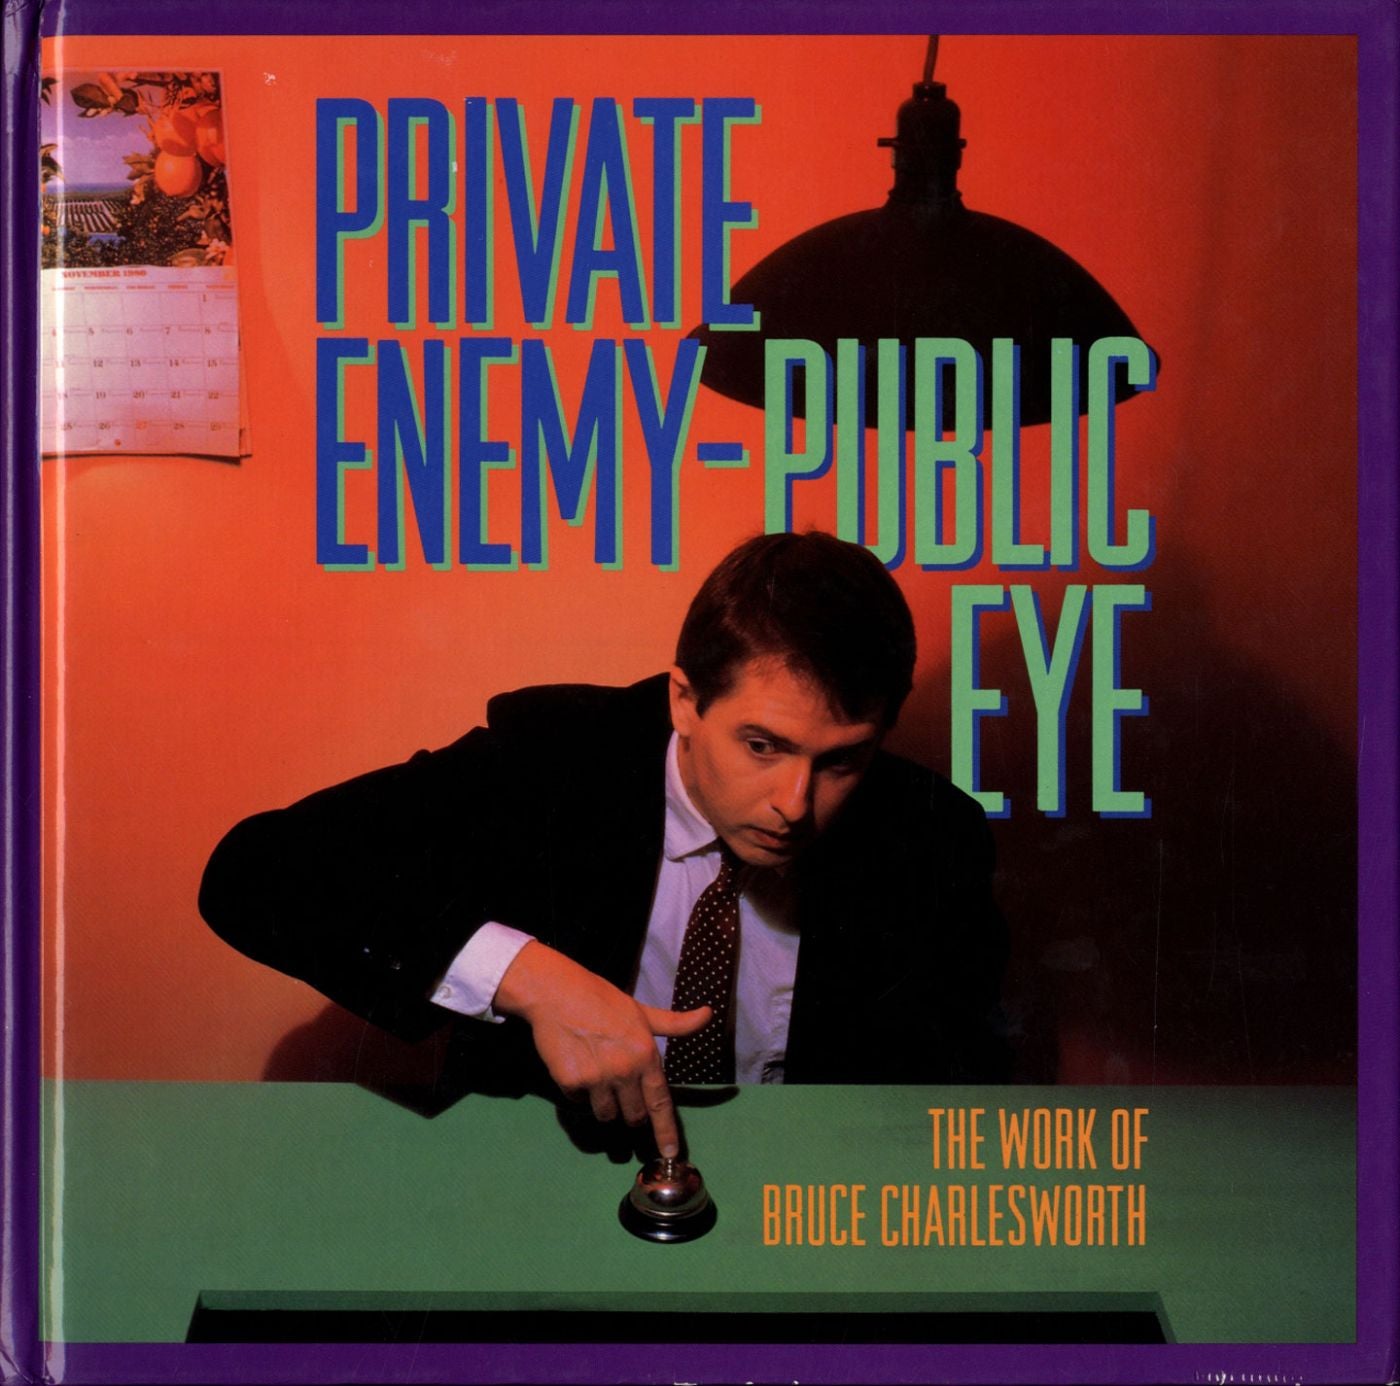 Private Enemy - Public Eye: The Work of Bruce Charlesworth